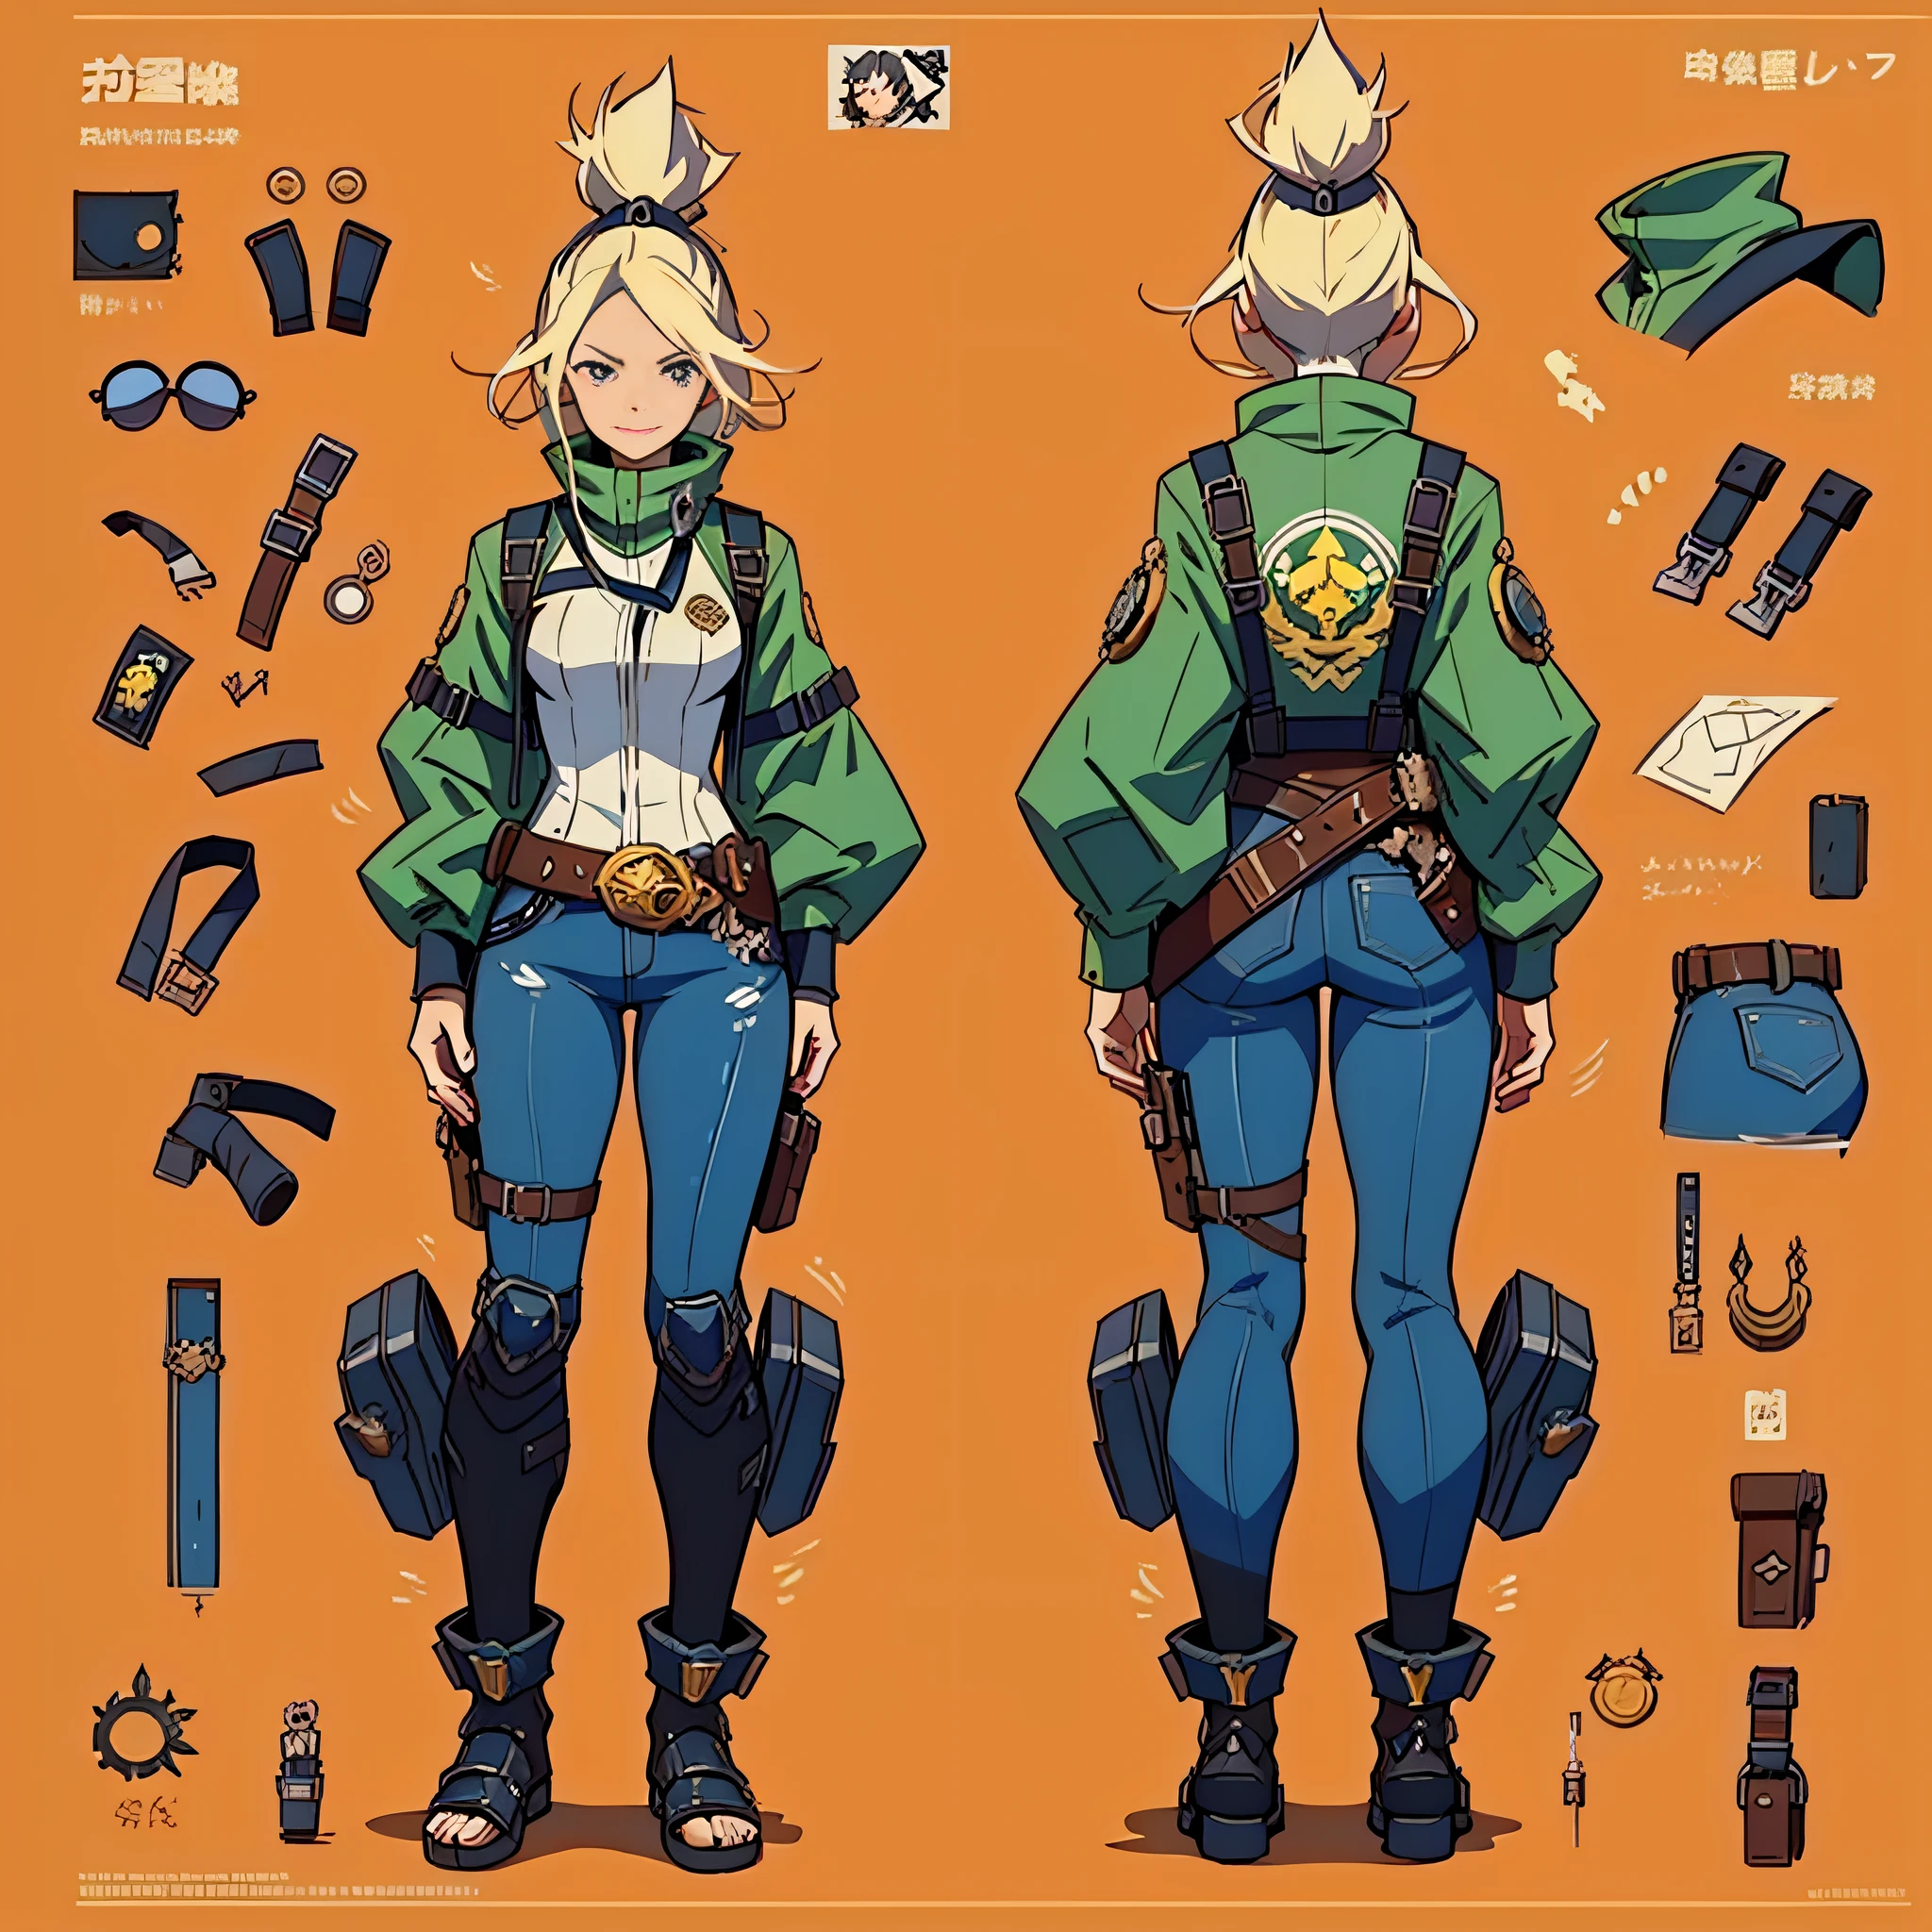 Close-up of a man in a gun costume, ((character concept art)), ((character design sheet, same character, front, side, back)) character art of maple story, video game character design, video game character design, maple story gun girl, girl wearing cute cartoon bunny hairpin on her head, yellow glowing decoration on girl's clothes, expert high detail concept art, metal bullet concept art, funny character design, Lucio as a woman, gravity rush inspiration, sticky tar. Concept art, belt buckle at waist, steampunk weapon,